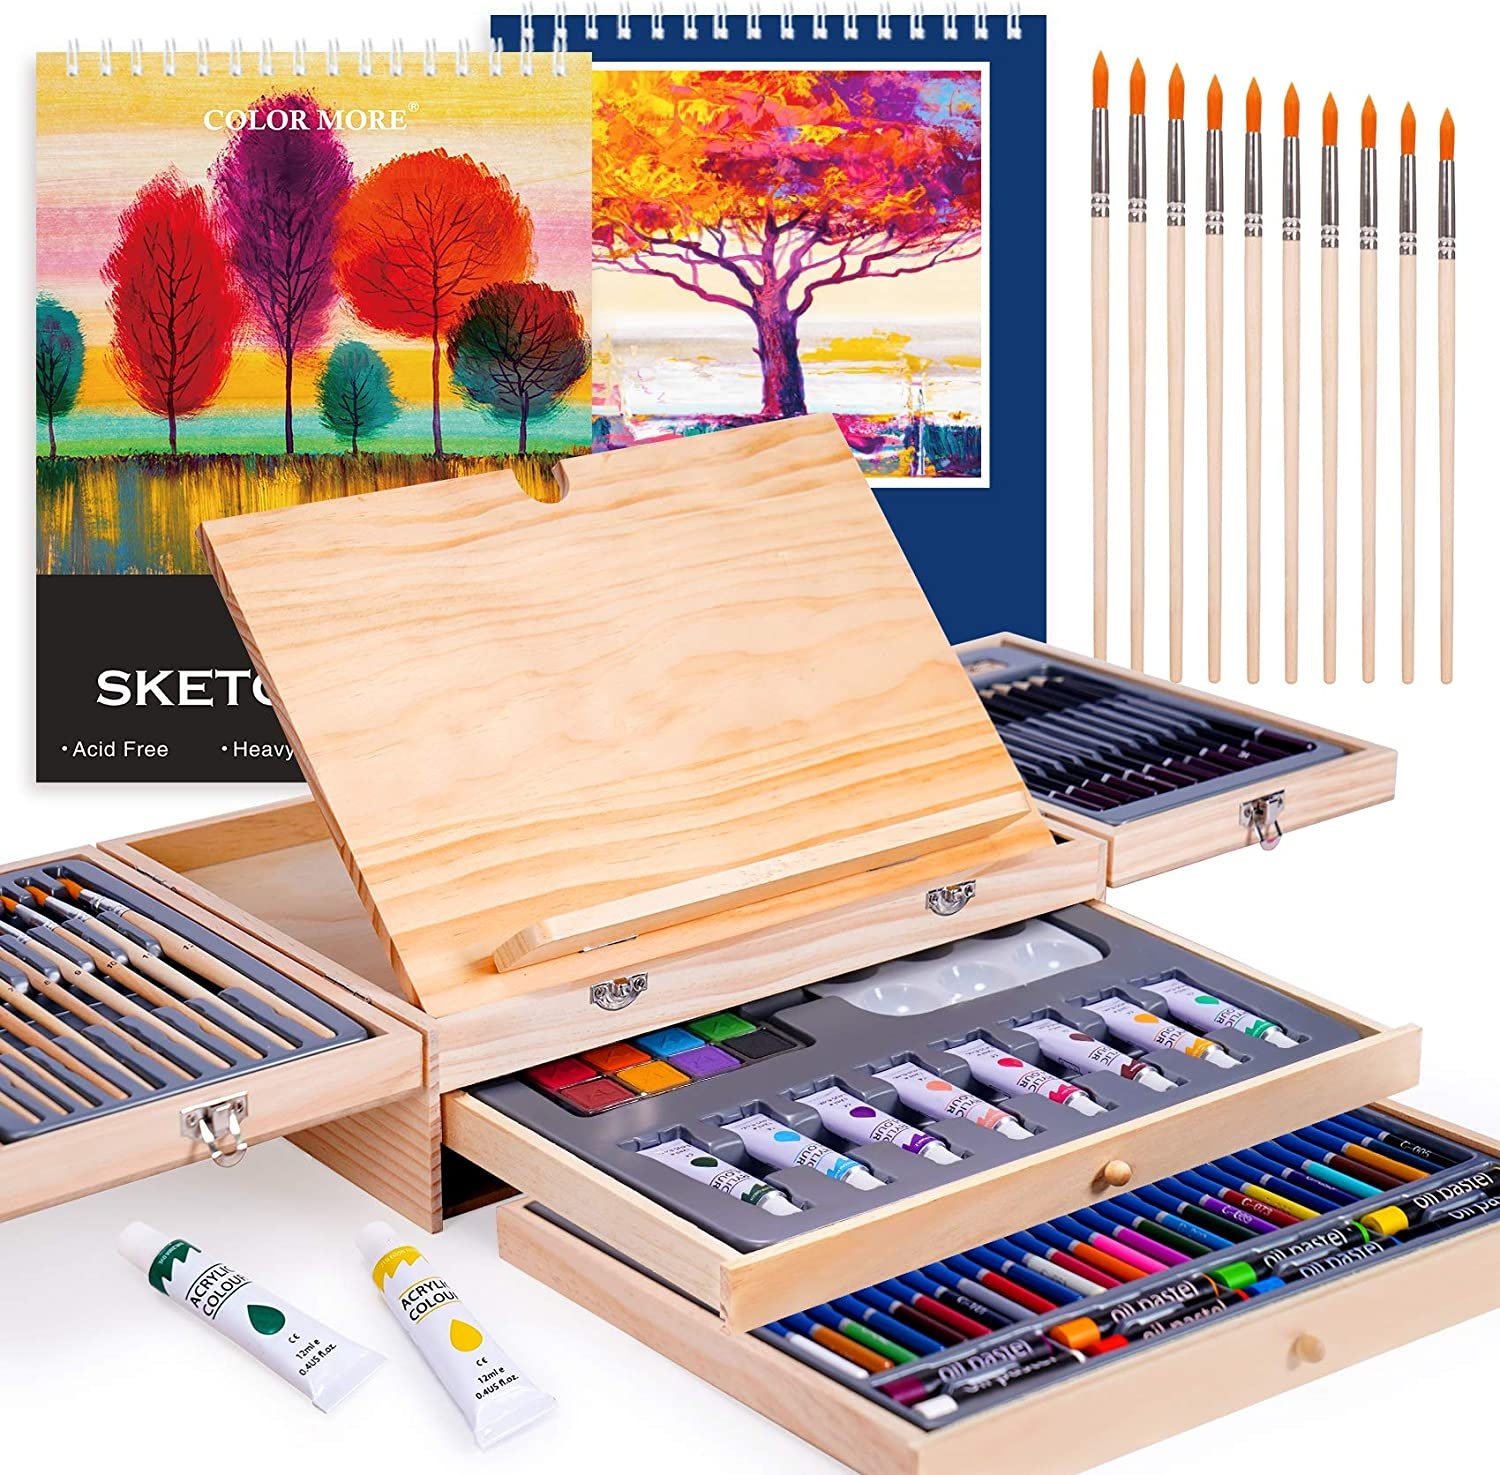 Darnassus 132-Piece Art Set Deluxe Professional Color Set Art Kit for Kids  and Adult With Compact Portable Case Pink